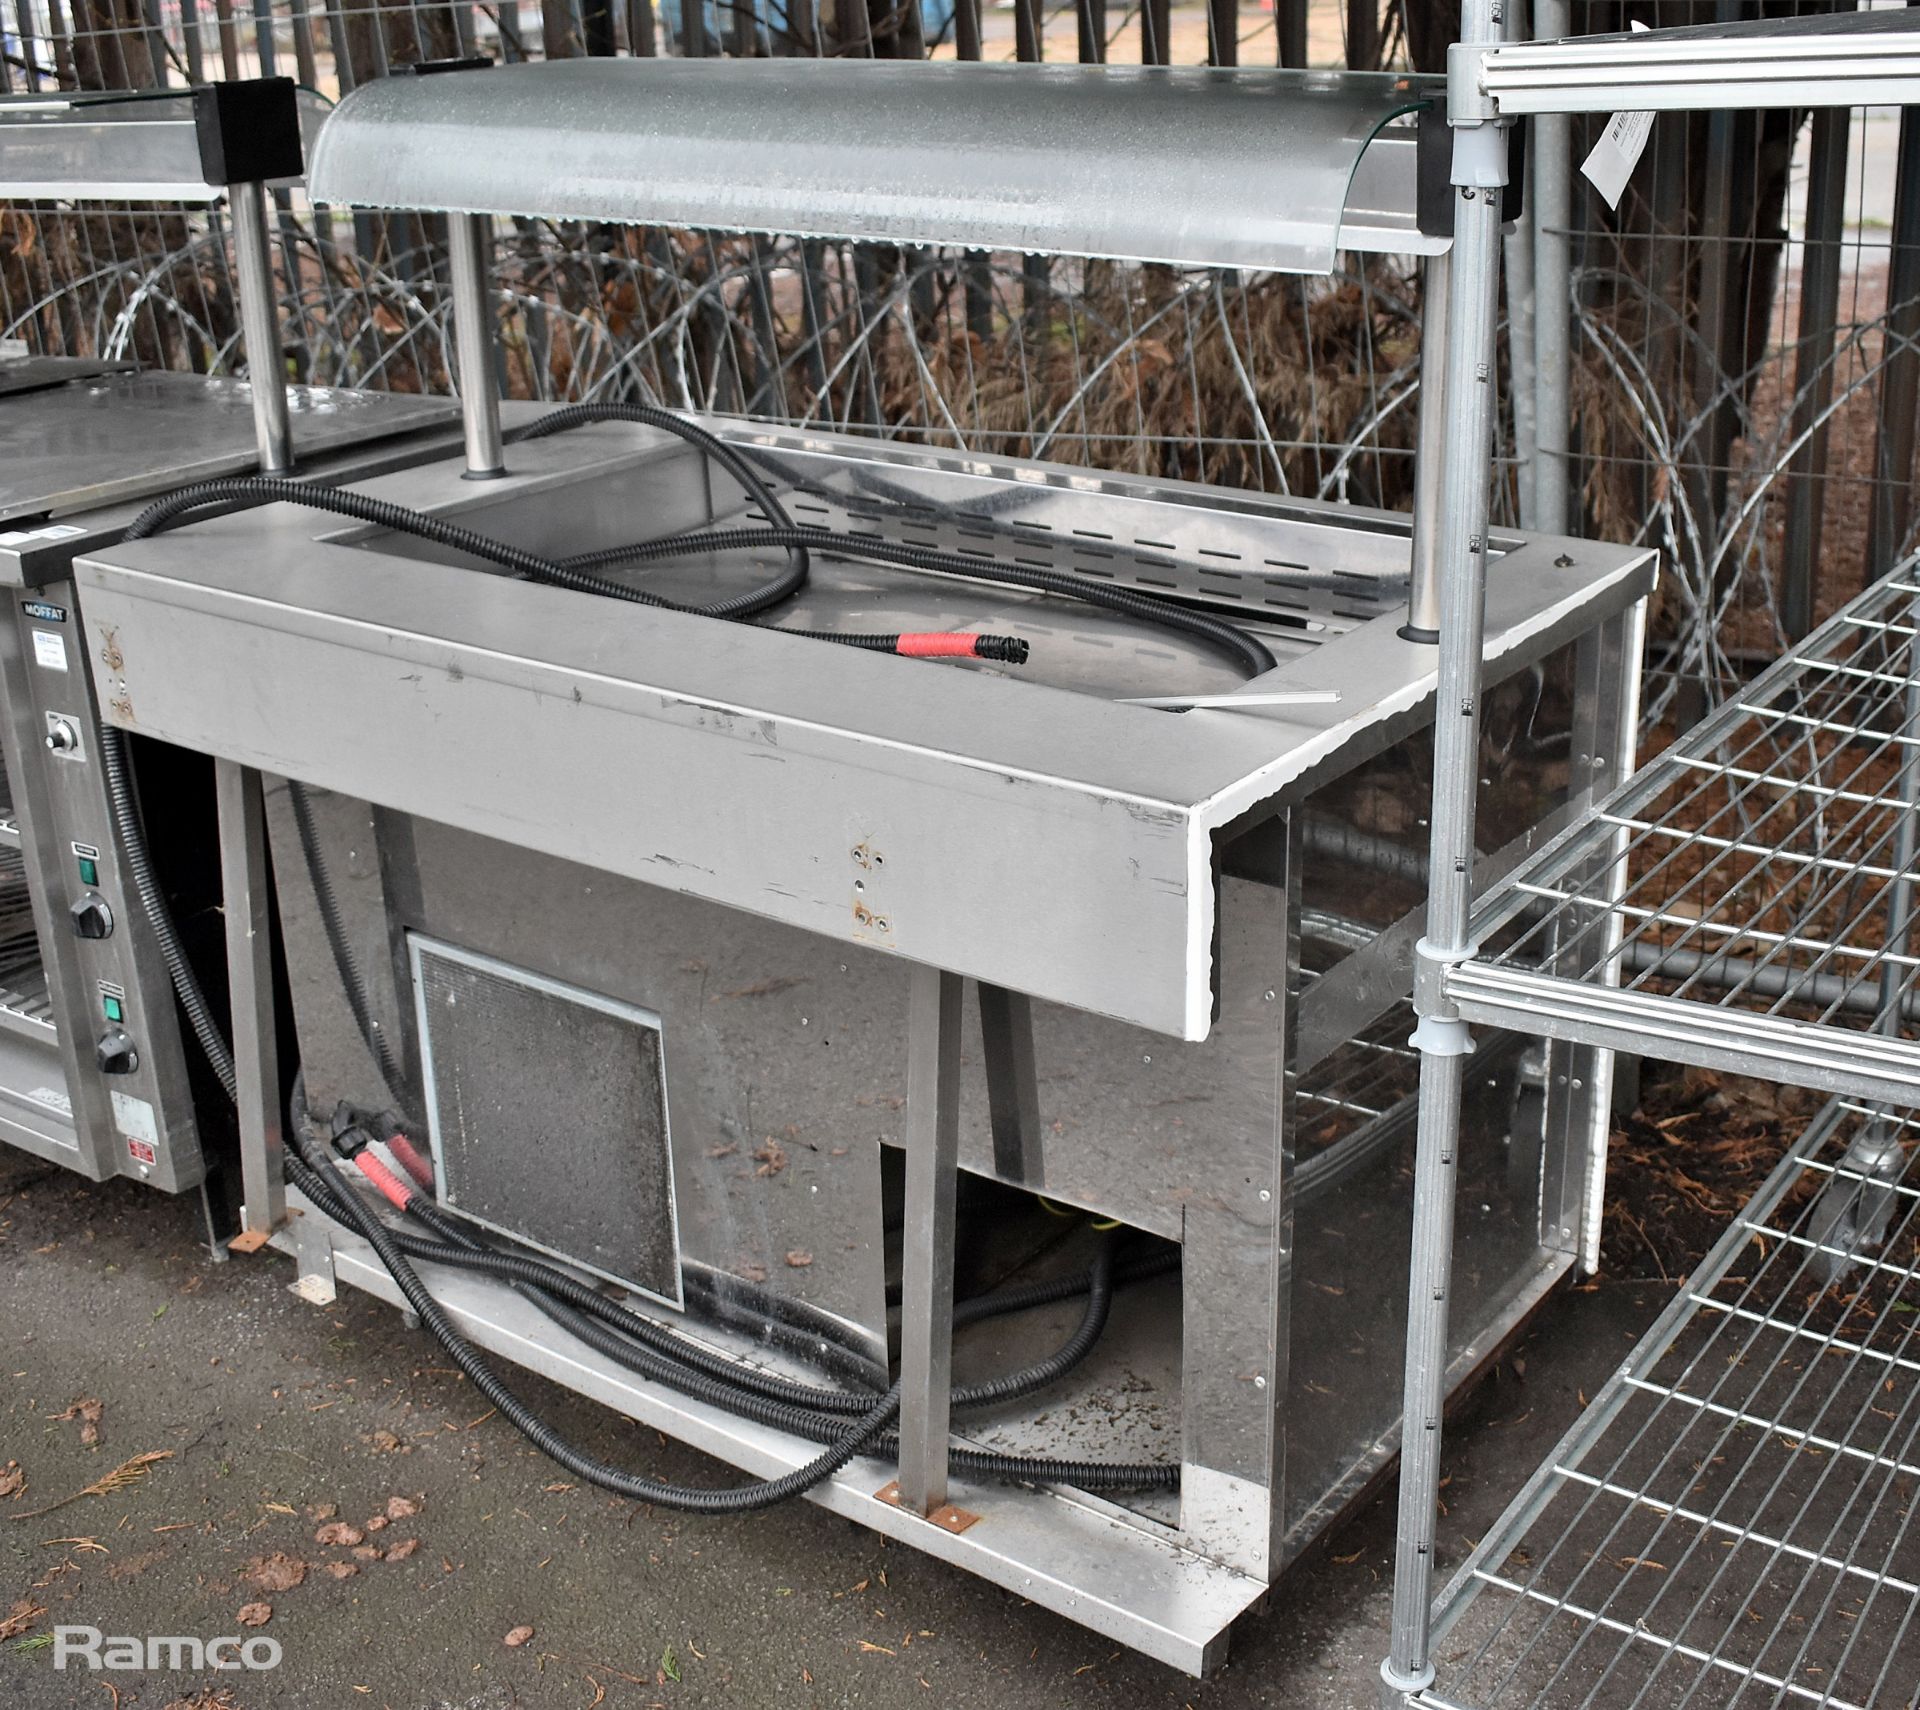 Moffat stainless steel bain marie with heated gantry - L155 x W80 x H132cm - Image 15 of 17